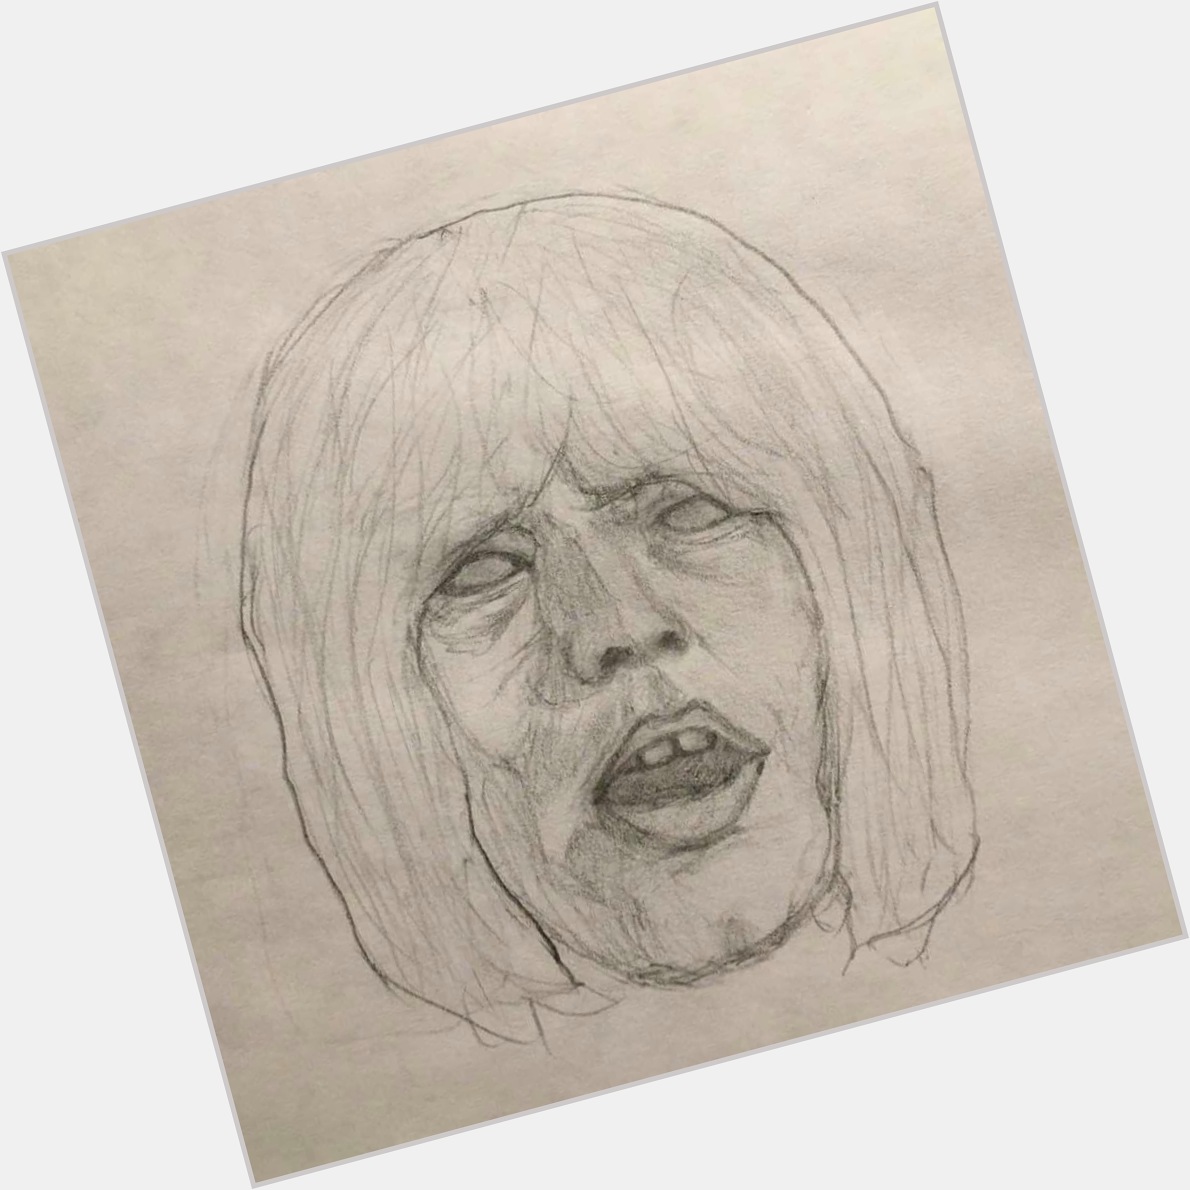 Happy 80th Birthday to Brian Jones in Heaven.

A sketch I did in the early 90s: 